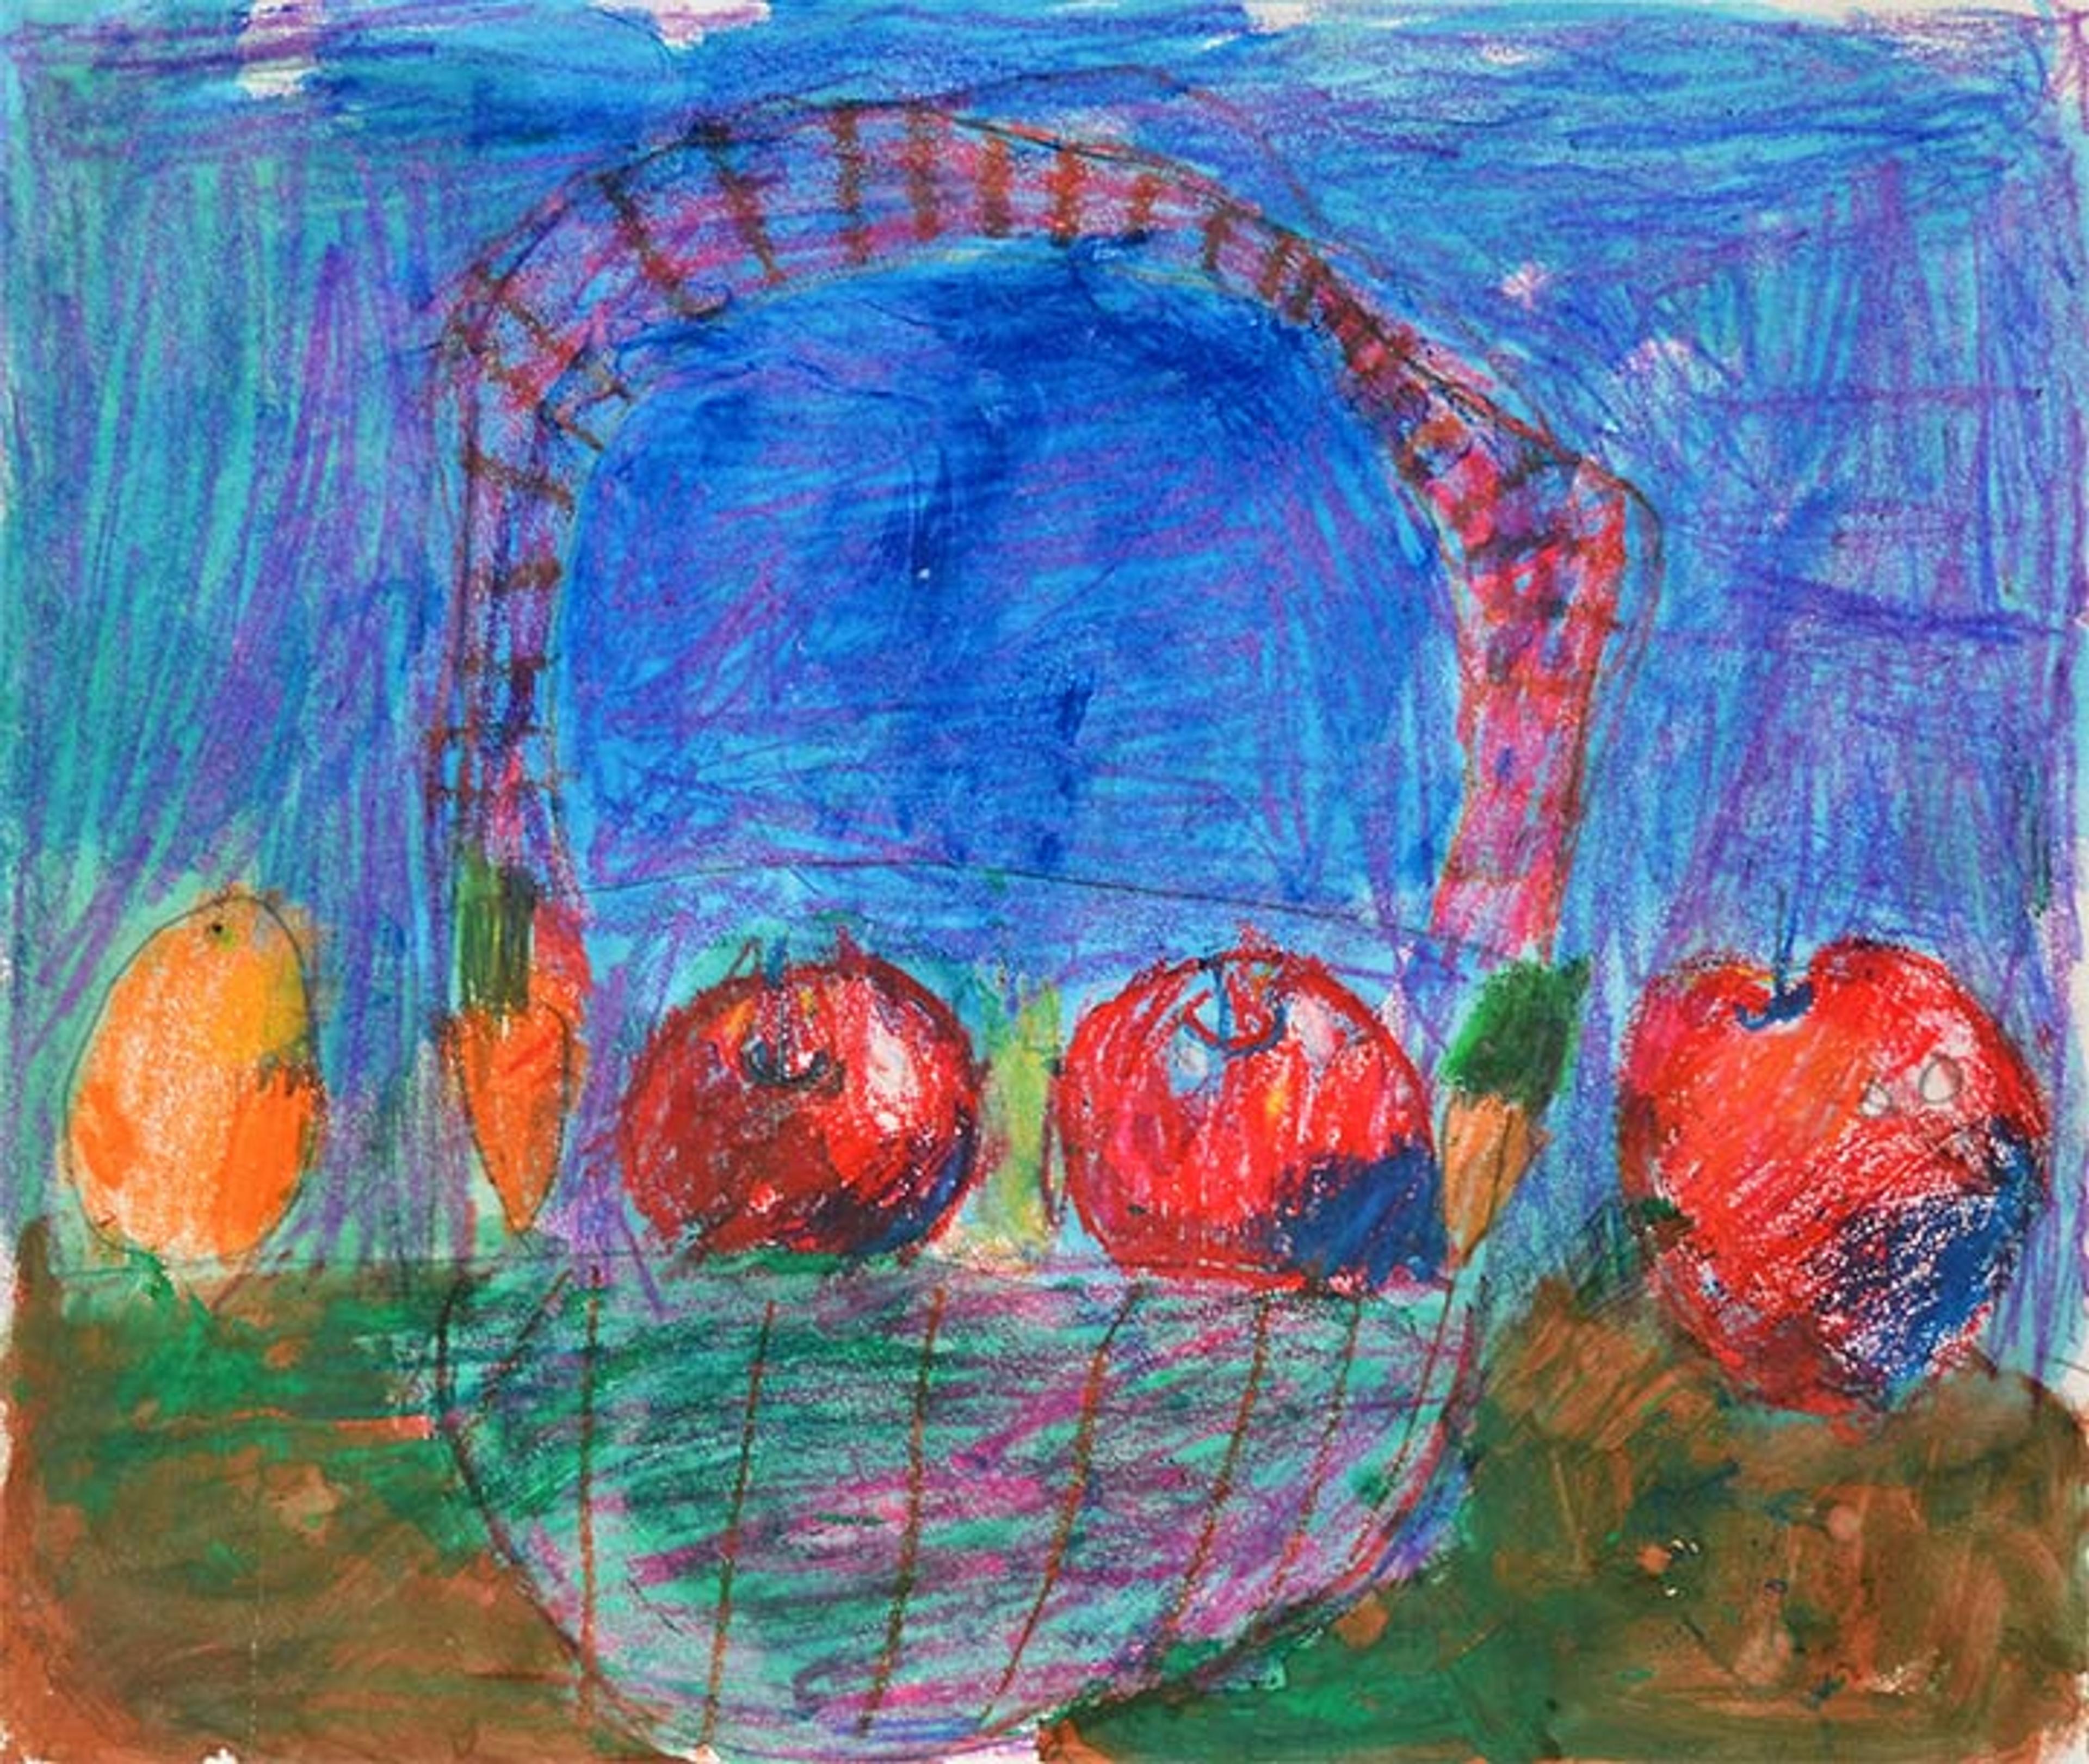 Paula's mixed-media composition of three red apples and a basket.